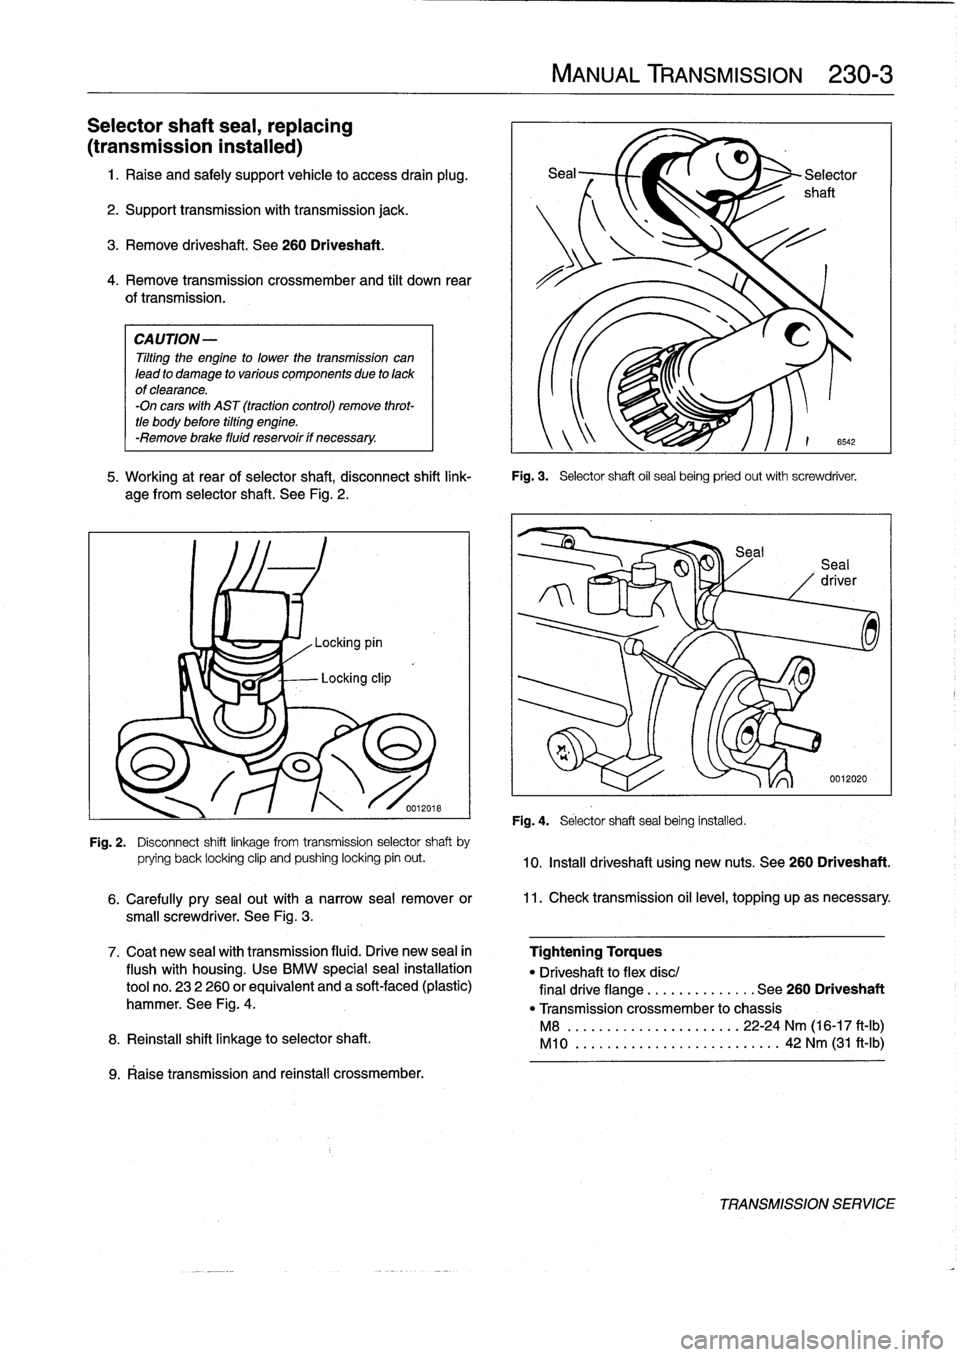 BMW 318i 1997 E36 Manual PDF 
Selector
shaft
seal,
replacing

(transmission
instalied)

1
.
Raise
and
safely
support
vehicle
to
access
drain
plug
.

2
.
Support
transmission
with
transmission
jack
.

3
.
Remove
driveshaft
.
See
2